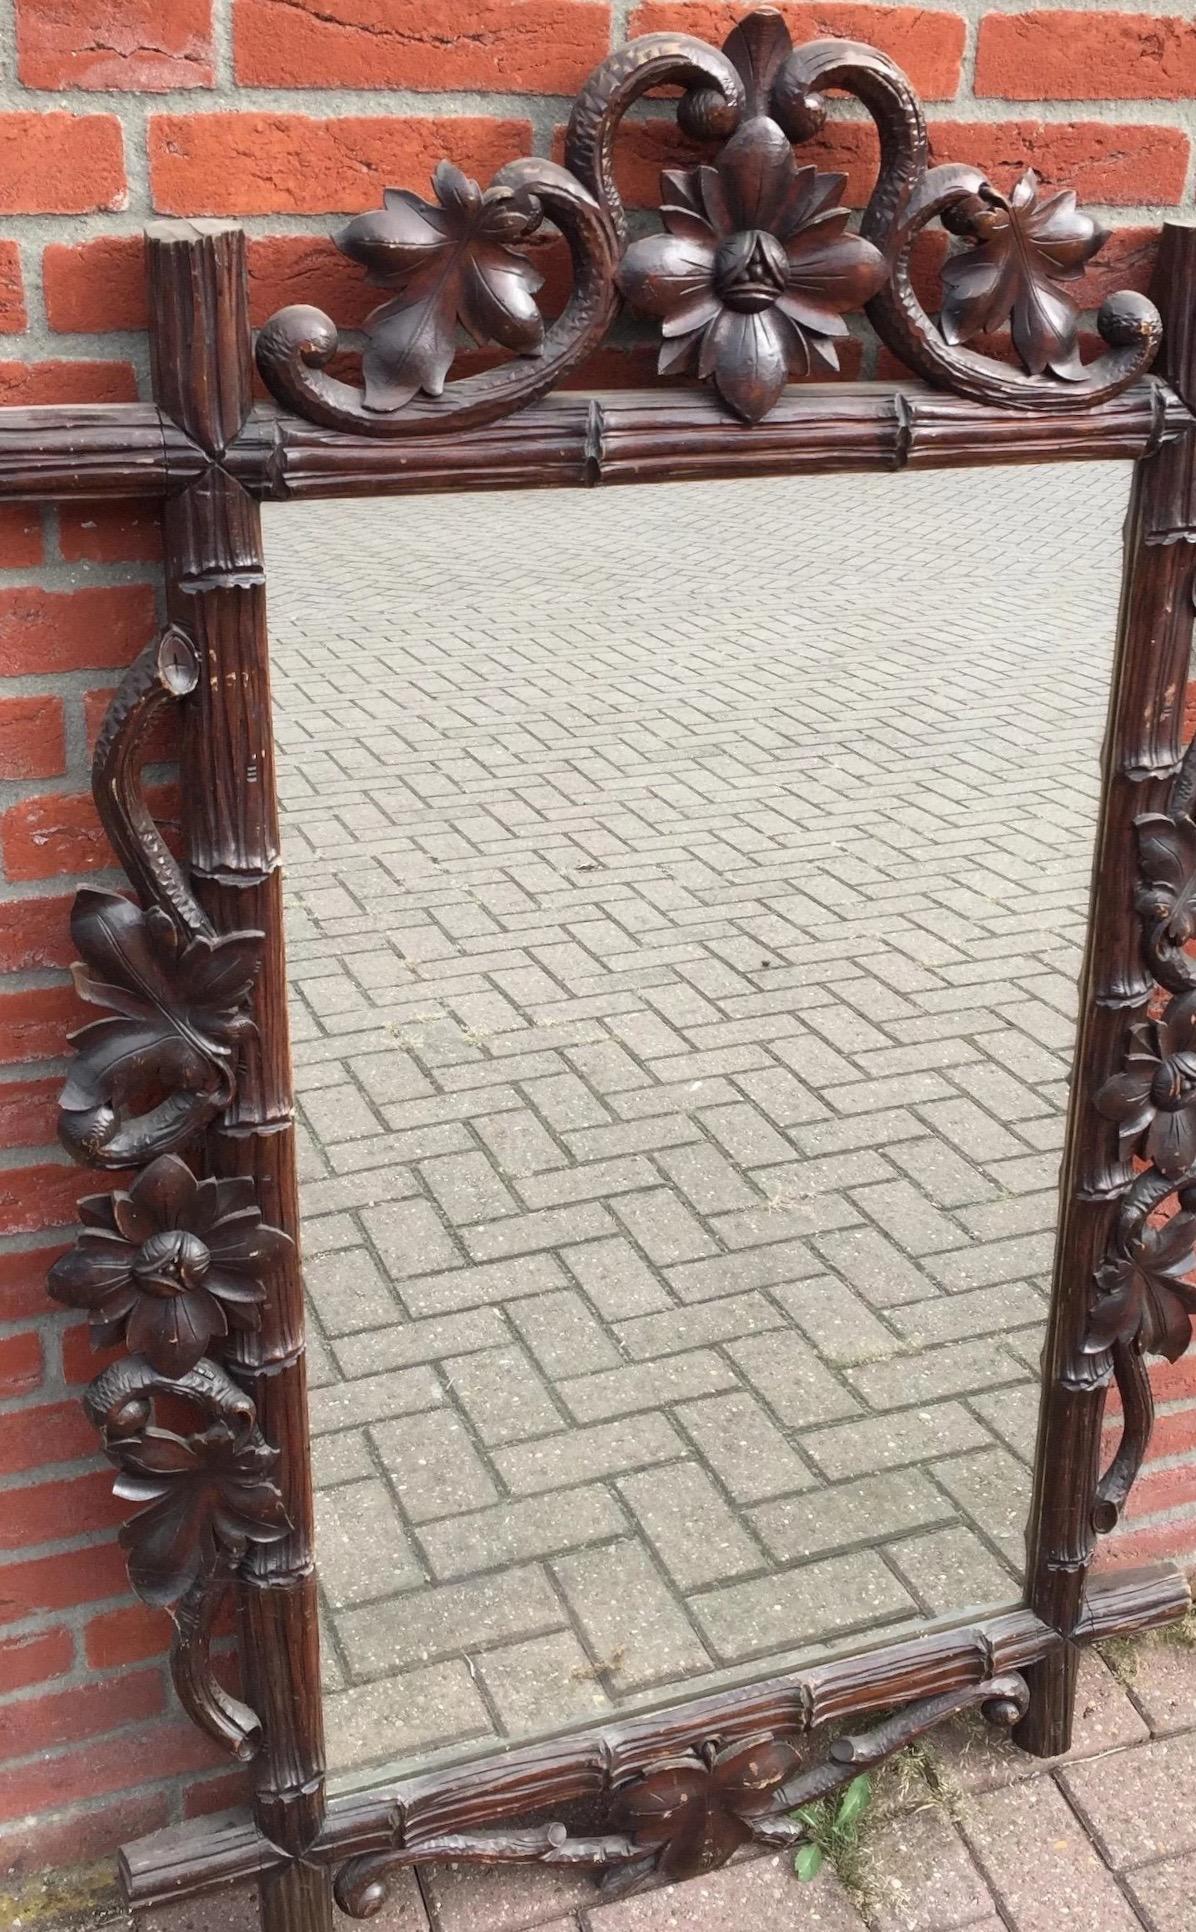 Antique, one of a kind and highly decorative, hand carved mirror. 

This beautiful, early 20th century, hand carved antique mirror is in great condition. The workmanship is of a quality and beauty that you just don't see anymore in this day and age